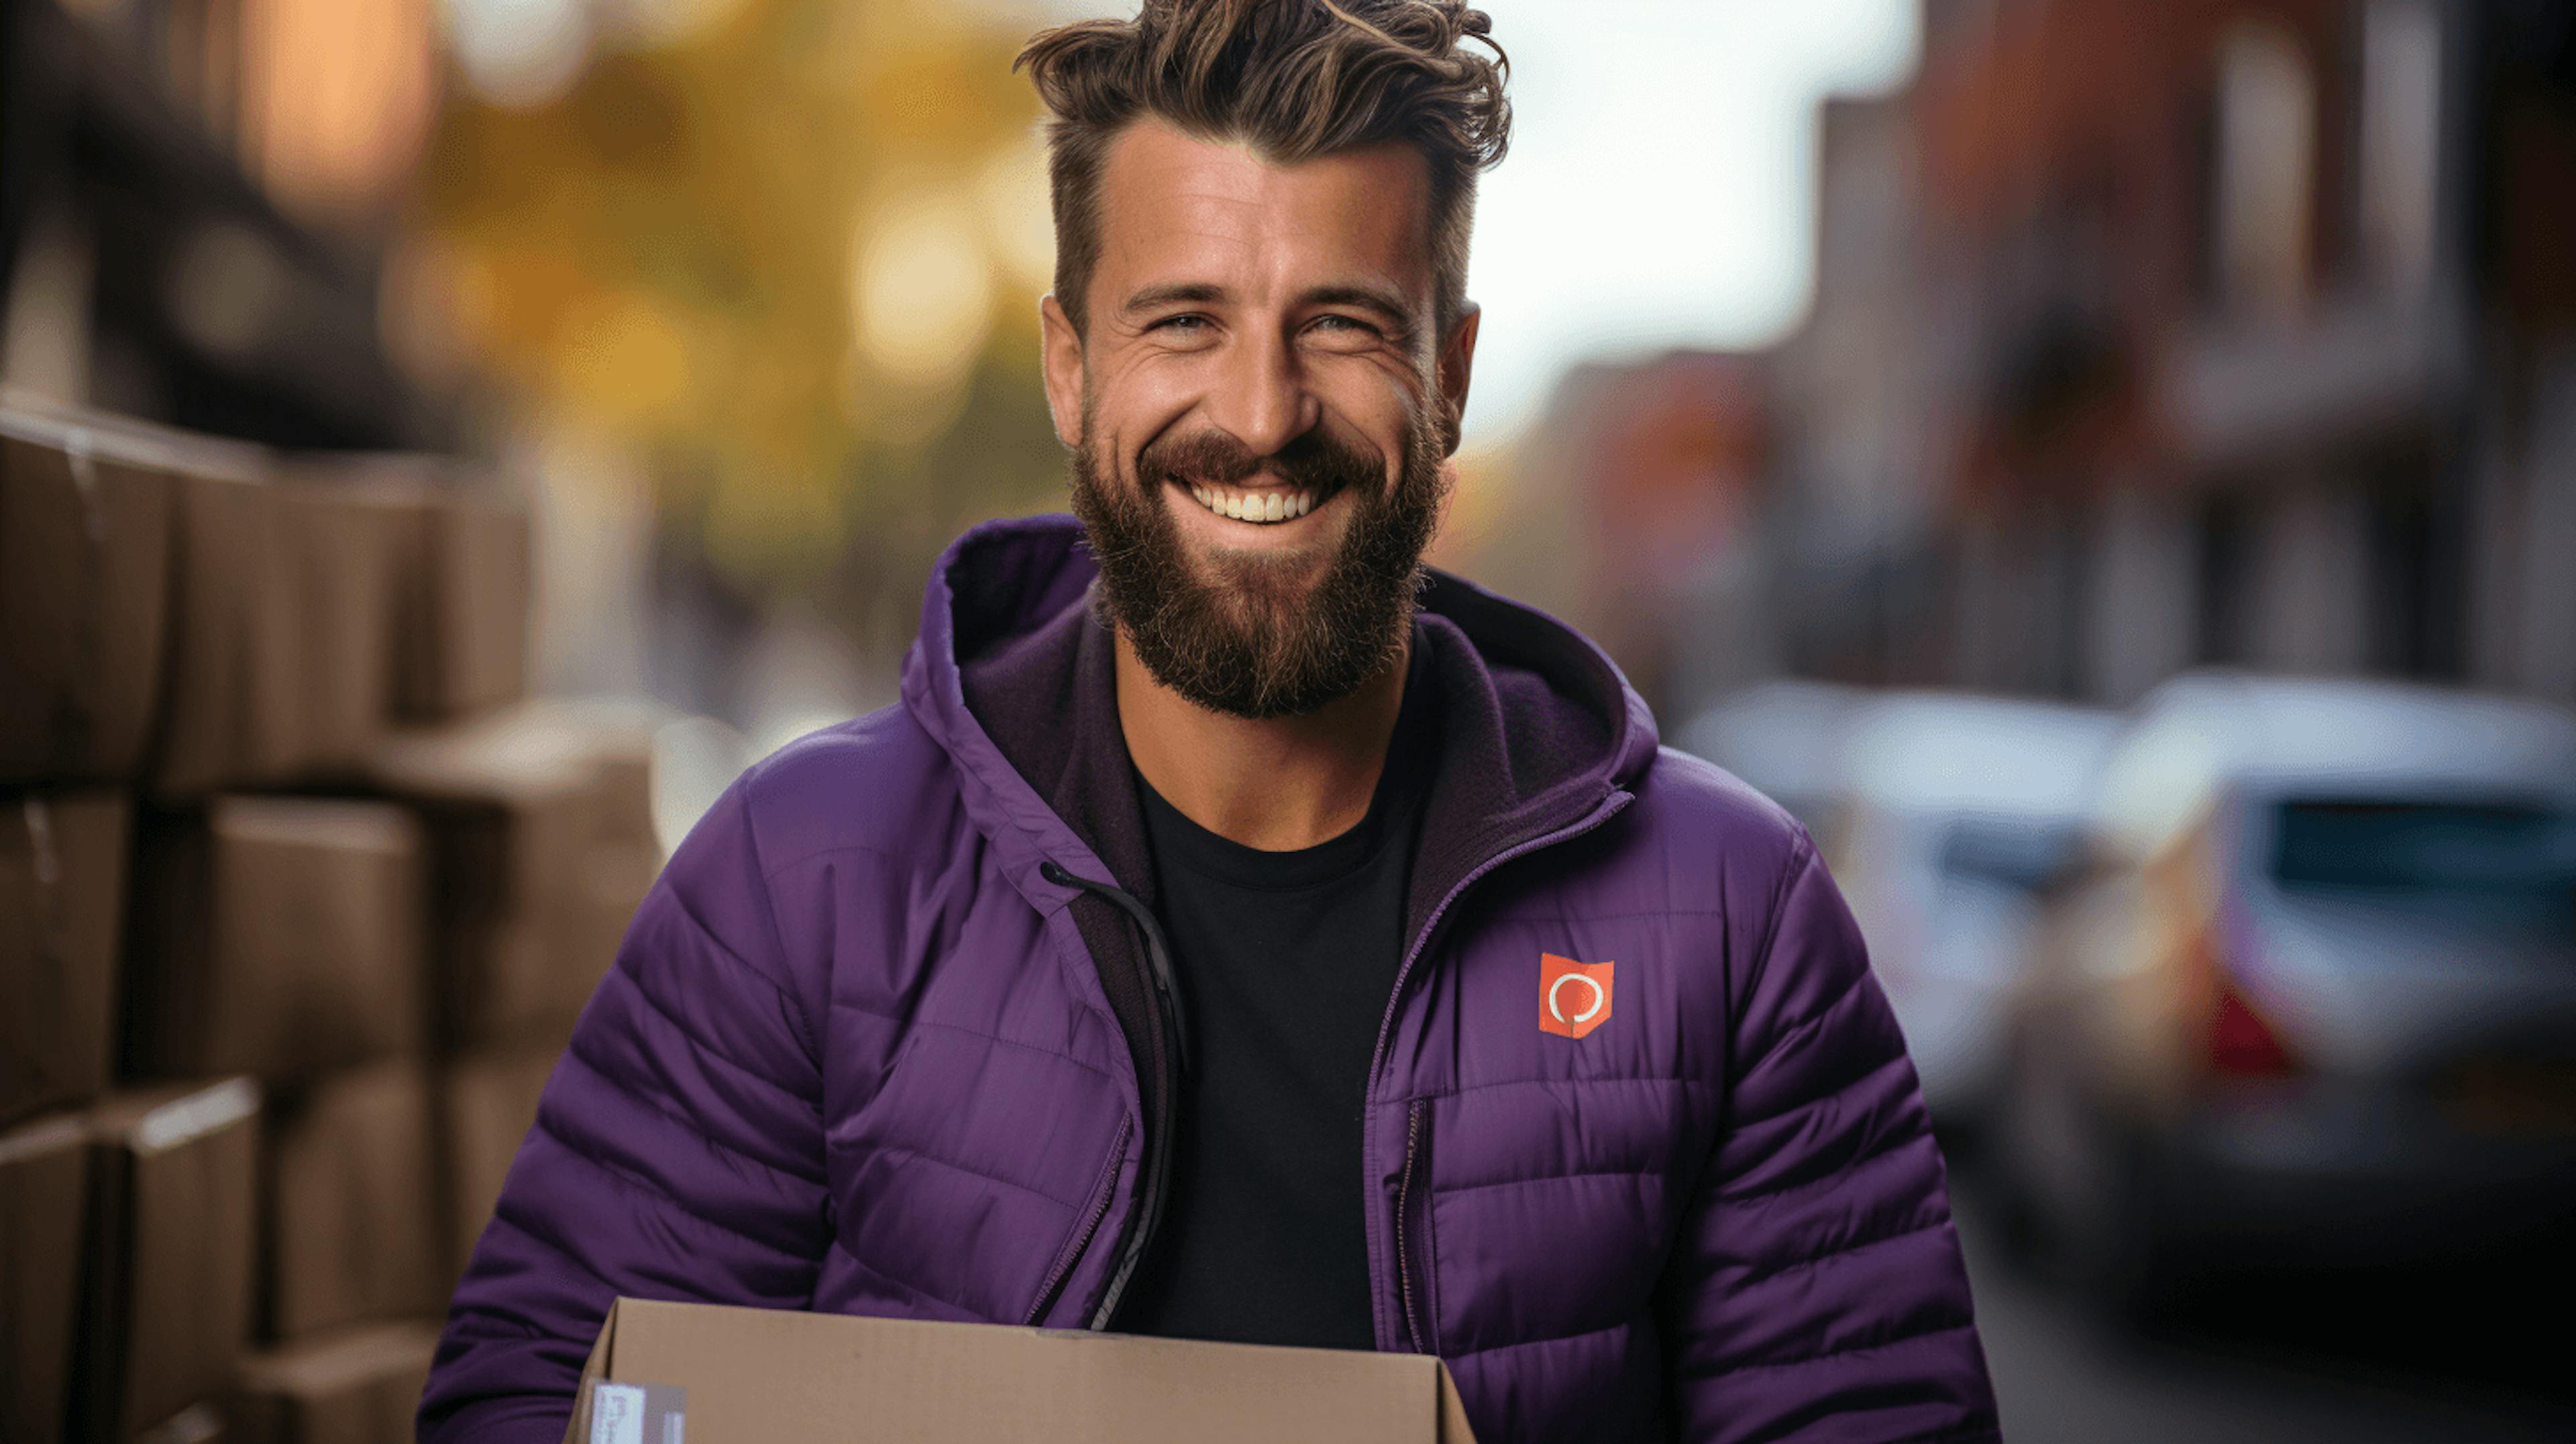 man in purple holding box and smiling with beard, in the style of commercial imagery